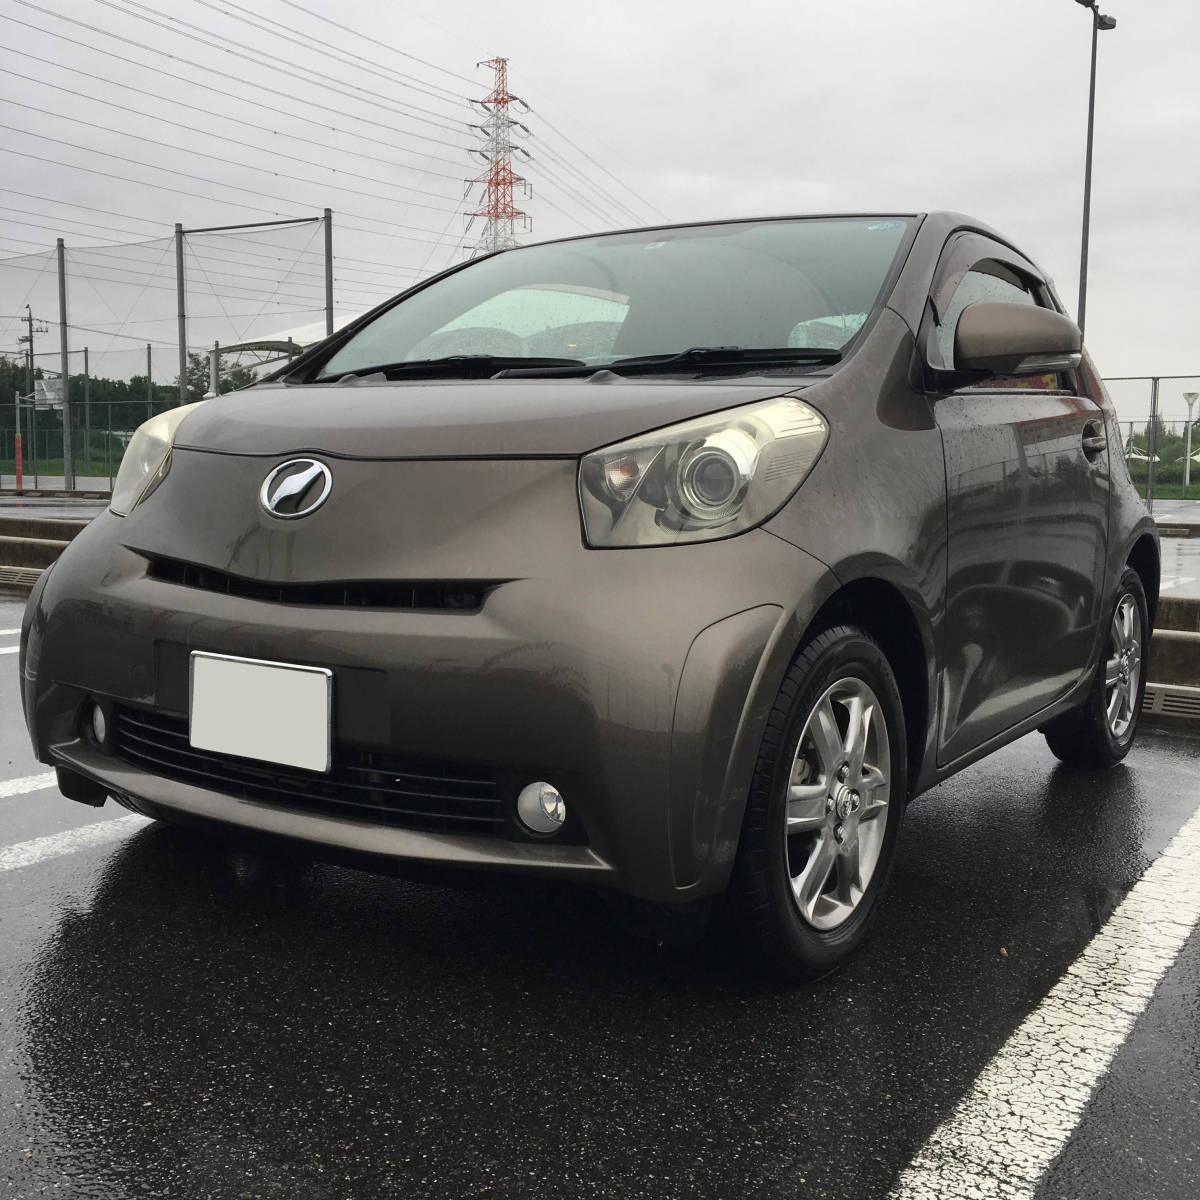  Toyota iQ 130G leather package 